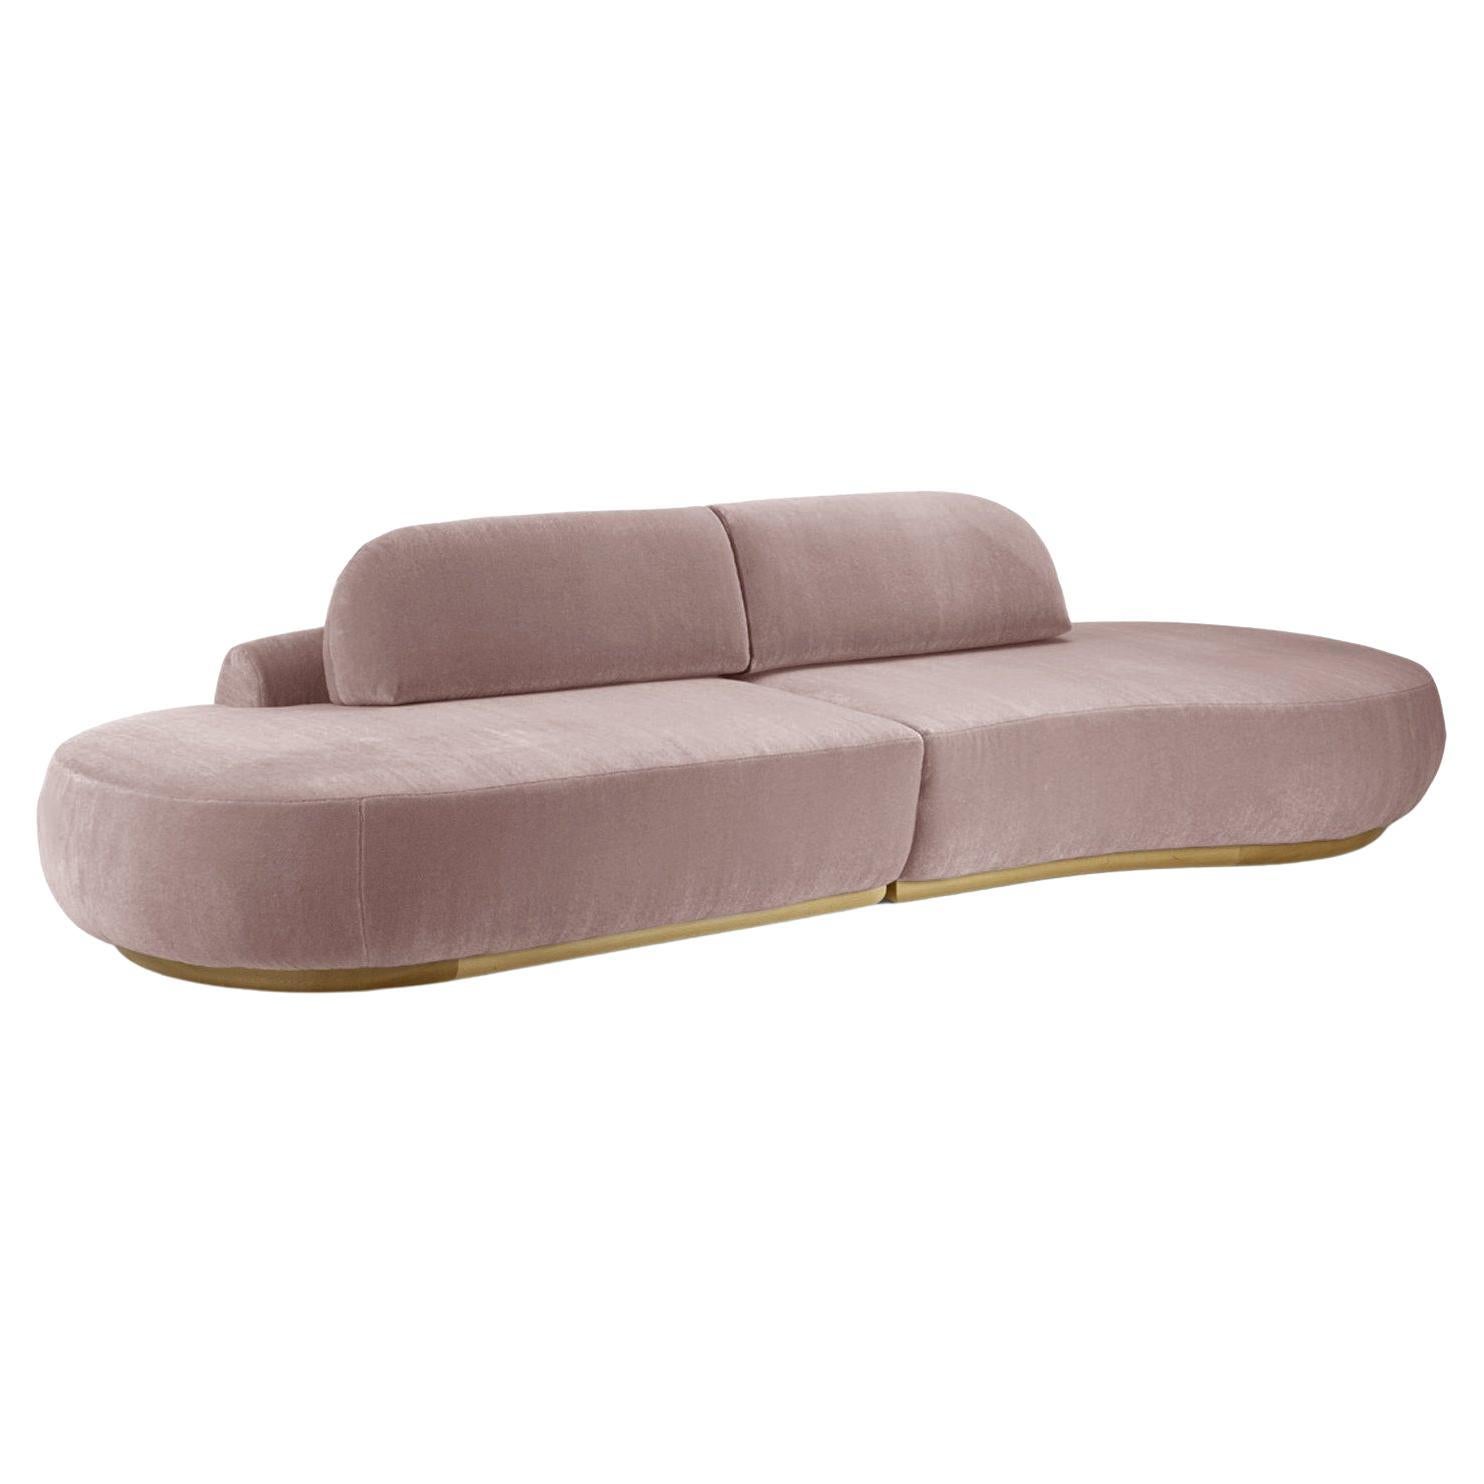 Naked Curved Sectional Sofa, 2 Piece with Natural Oak and Barcelona Lotus